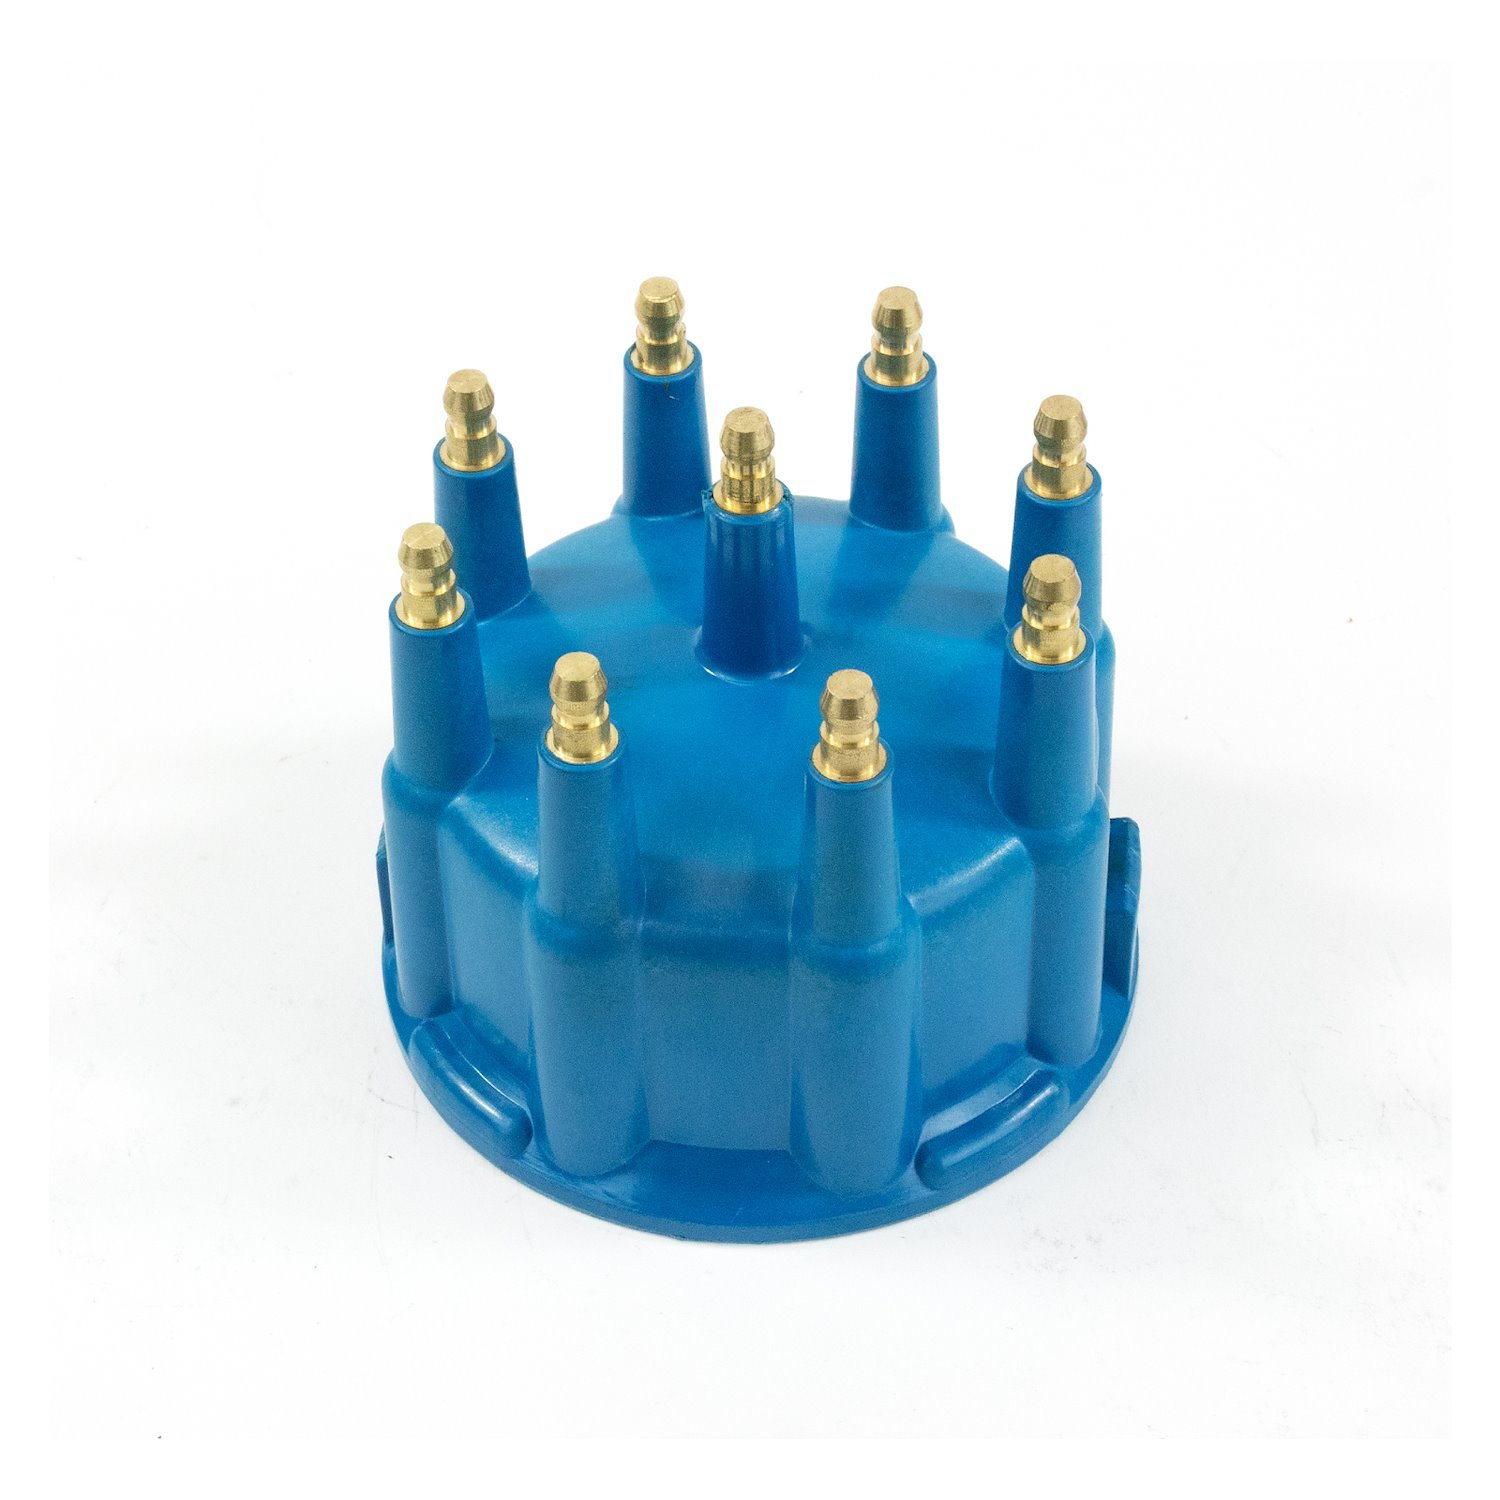 JM6971BL Pro Billet & Ready-to-Run Distributor Cap and Rotor Kit, 8 Cyl Male, Blue